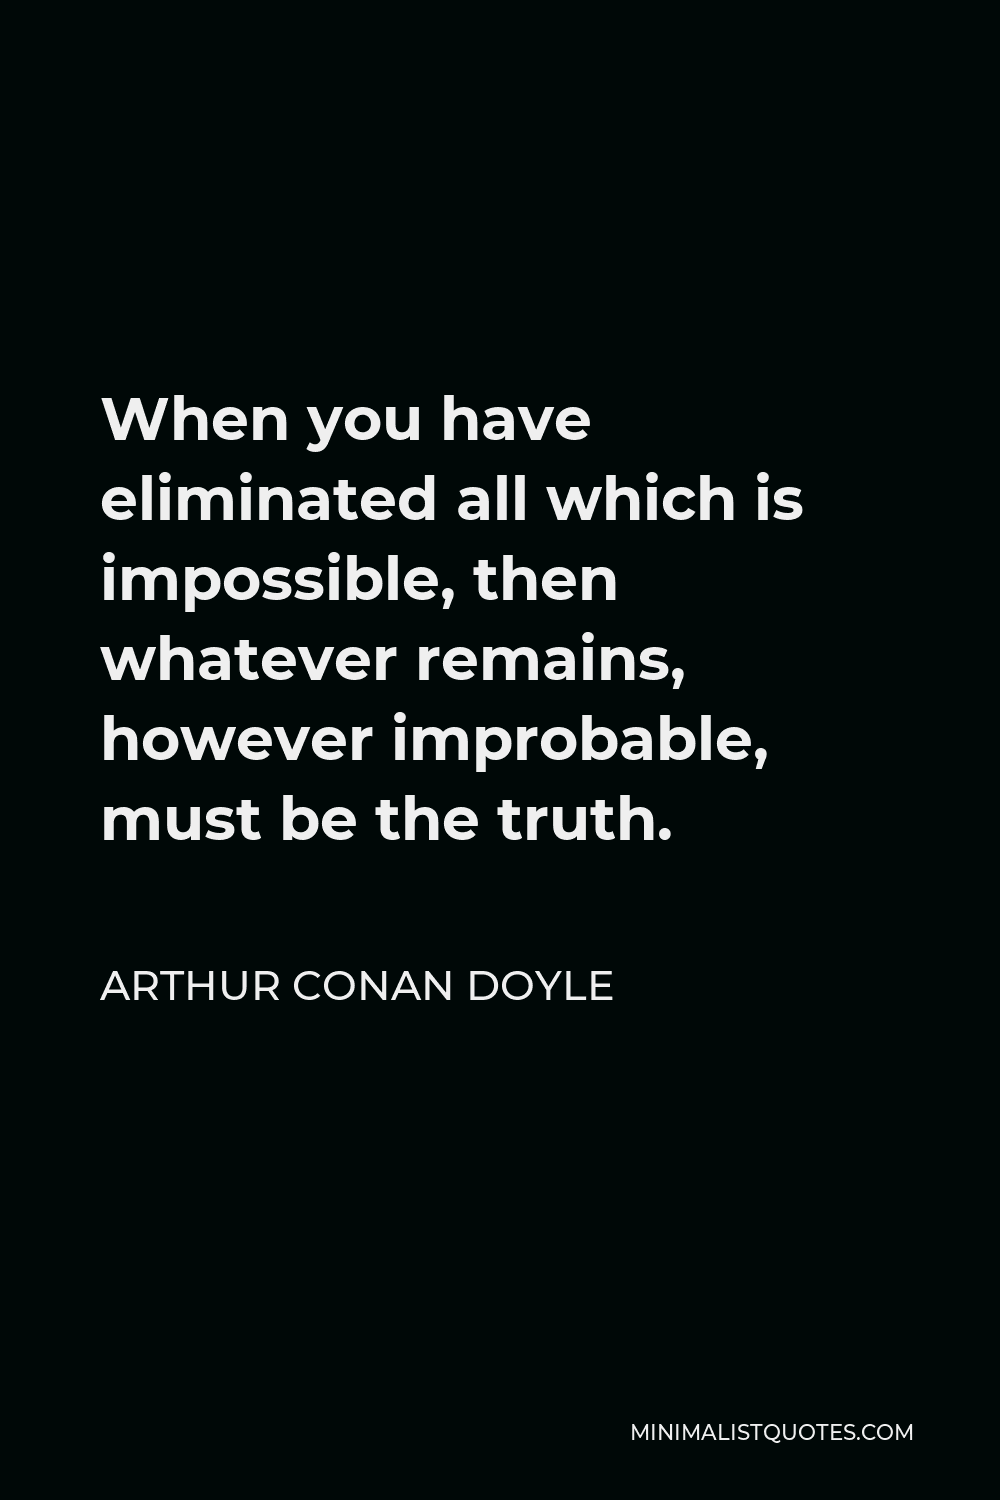 Arthur Conan Doyle Quote - When you have eliminated all which is impossible, then whatever remains, however improbable, must be the truth.